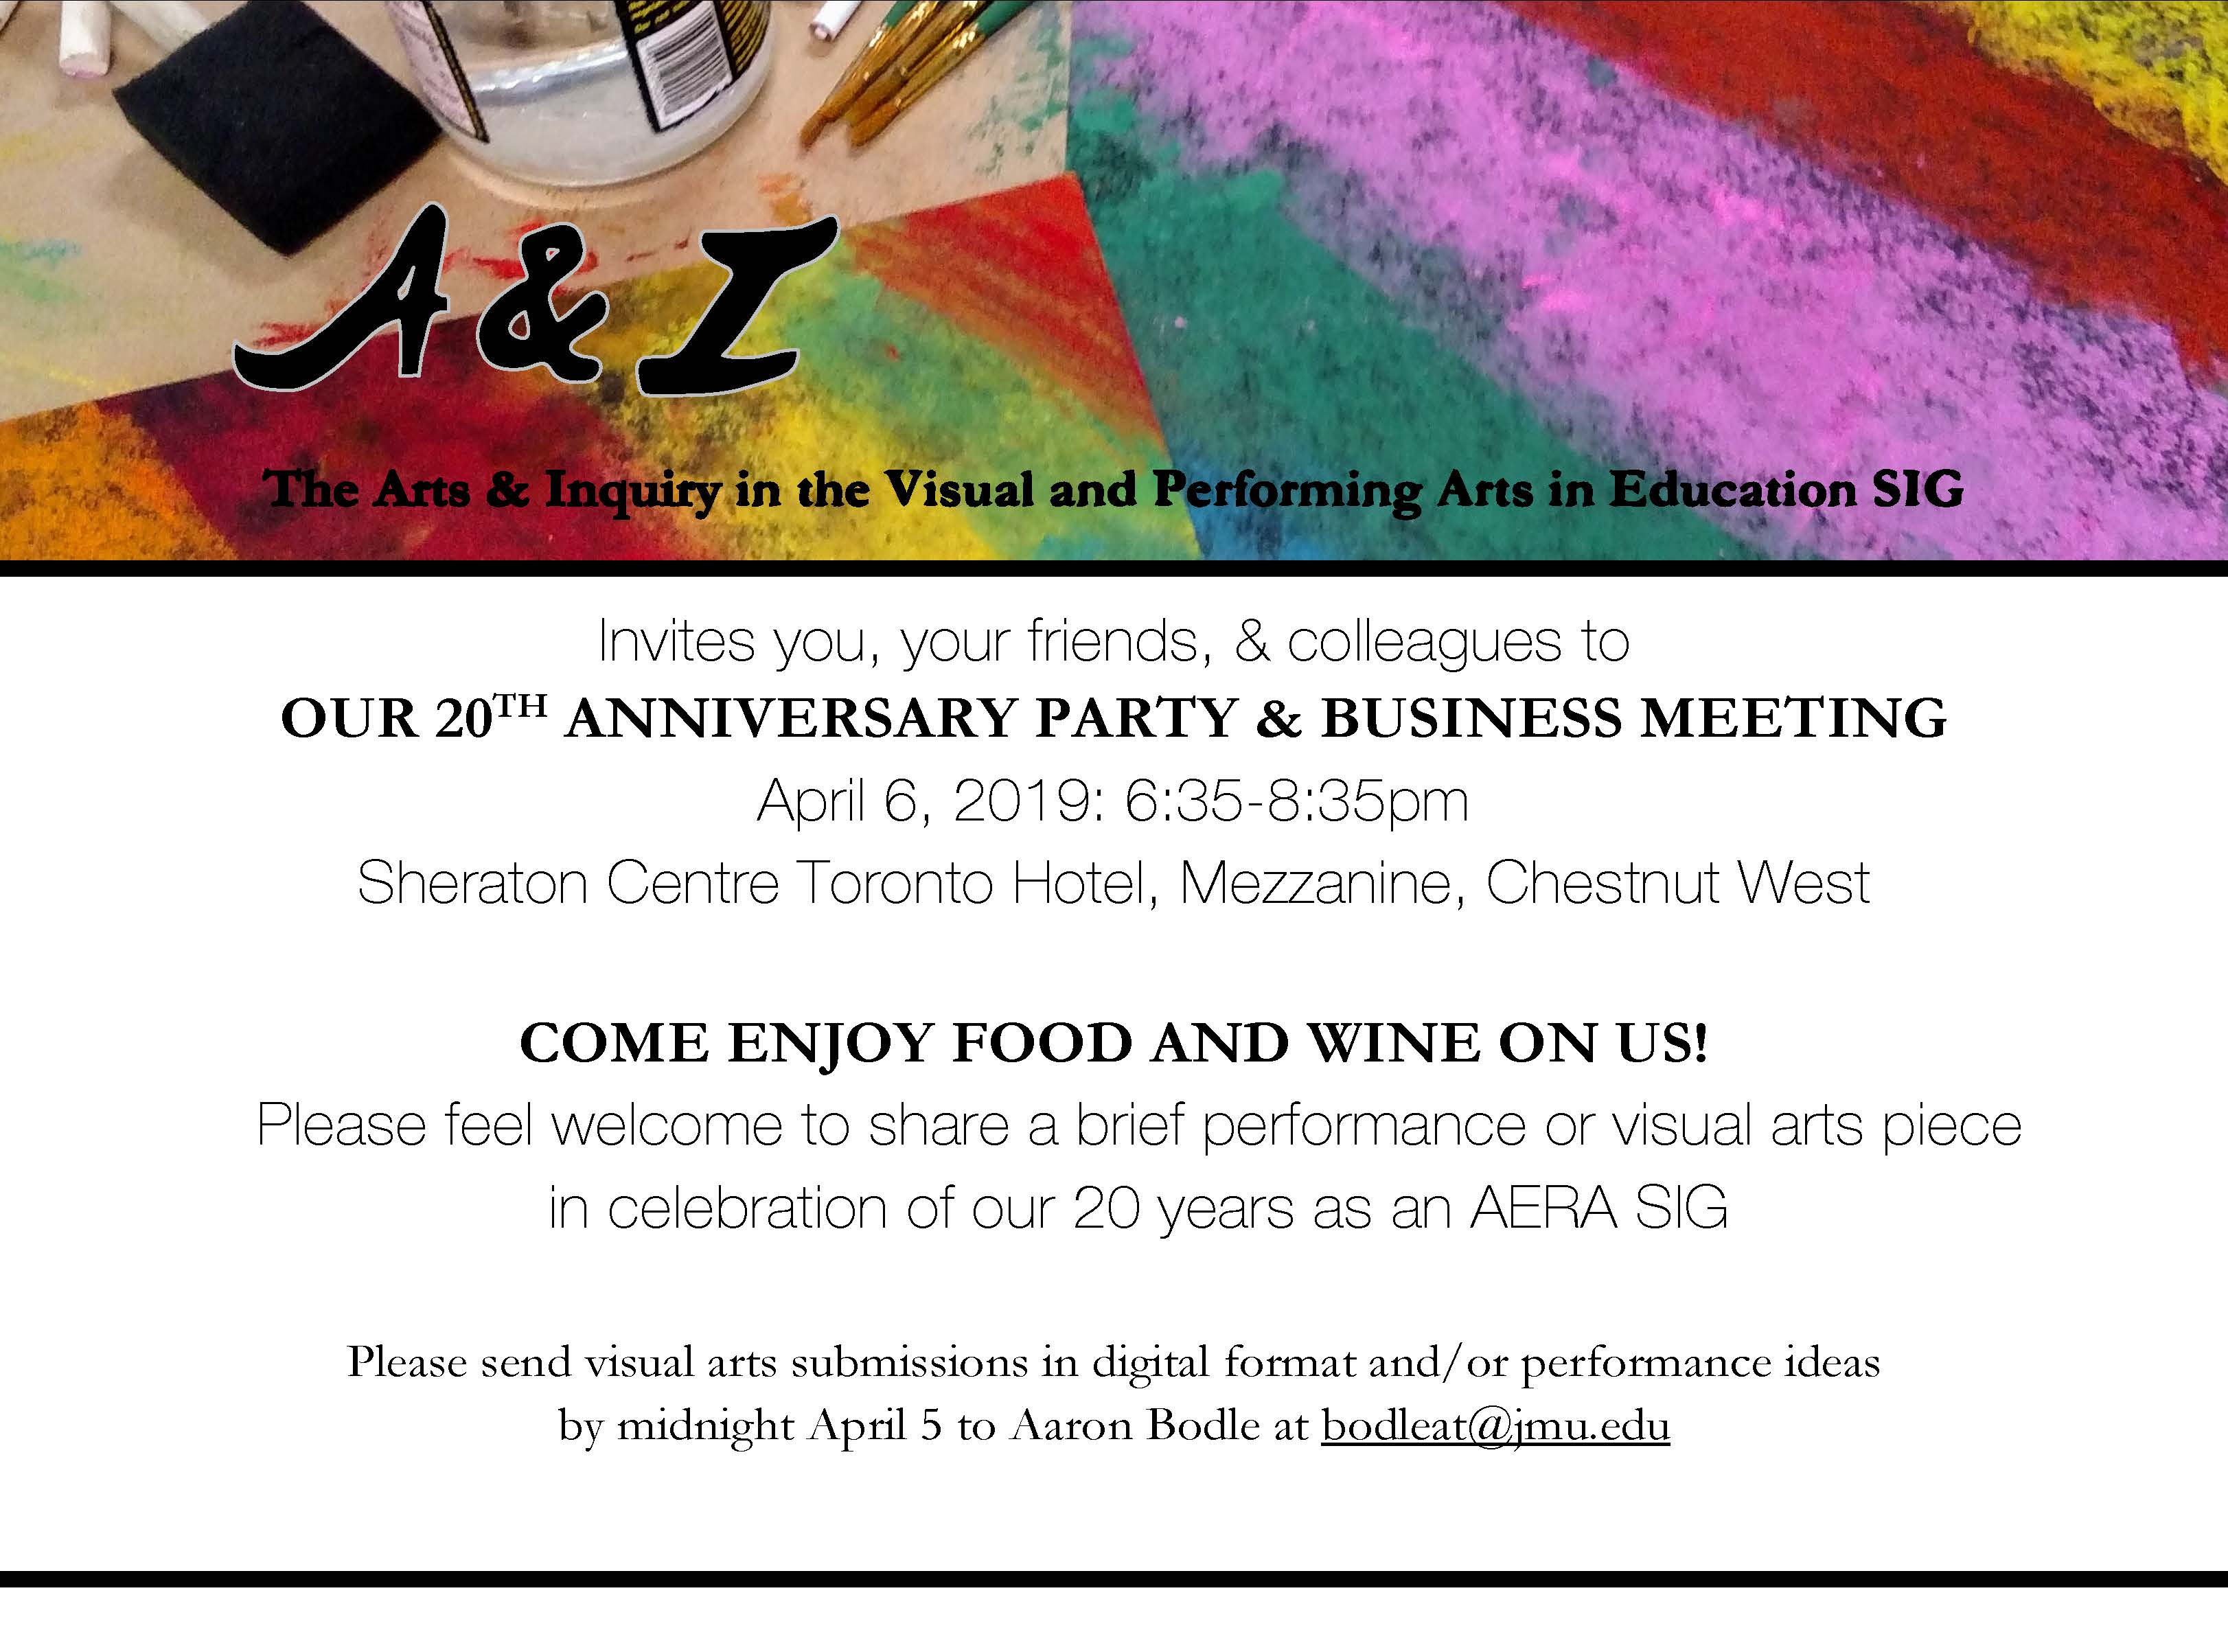 20th Anniversary Party and Business Meeting A&I SIG invite_Page_1636880930242458329